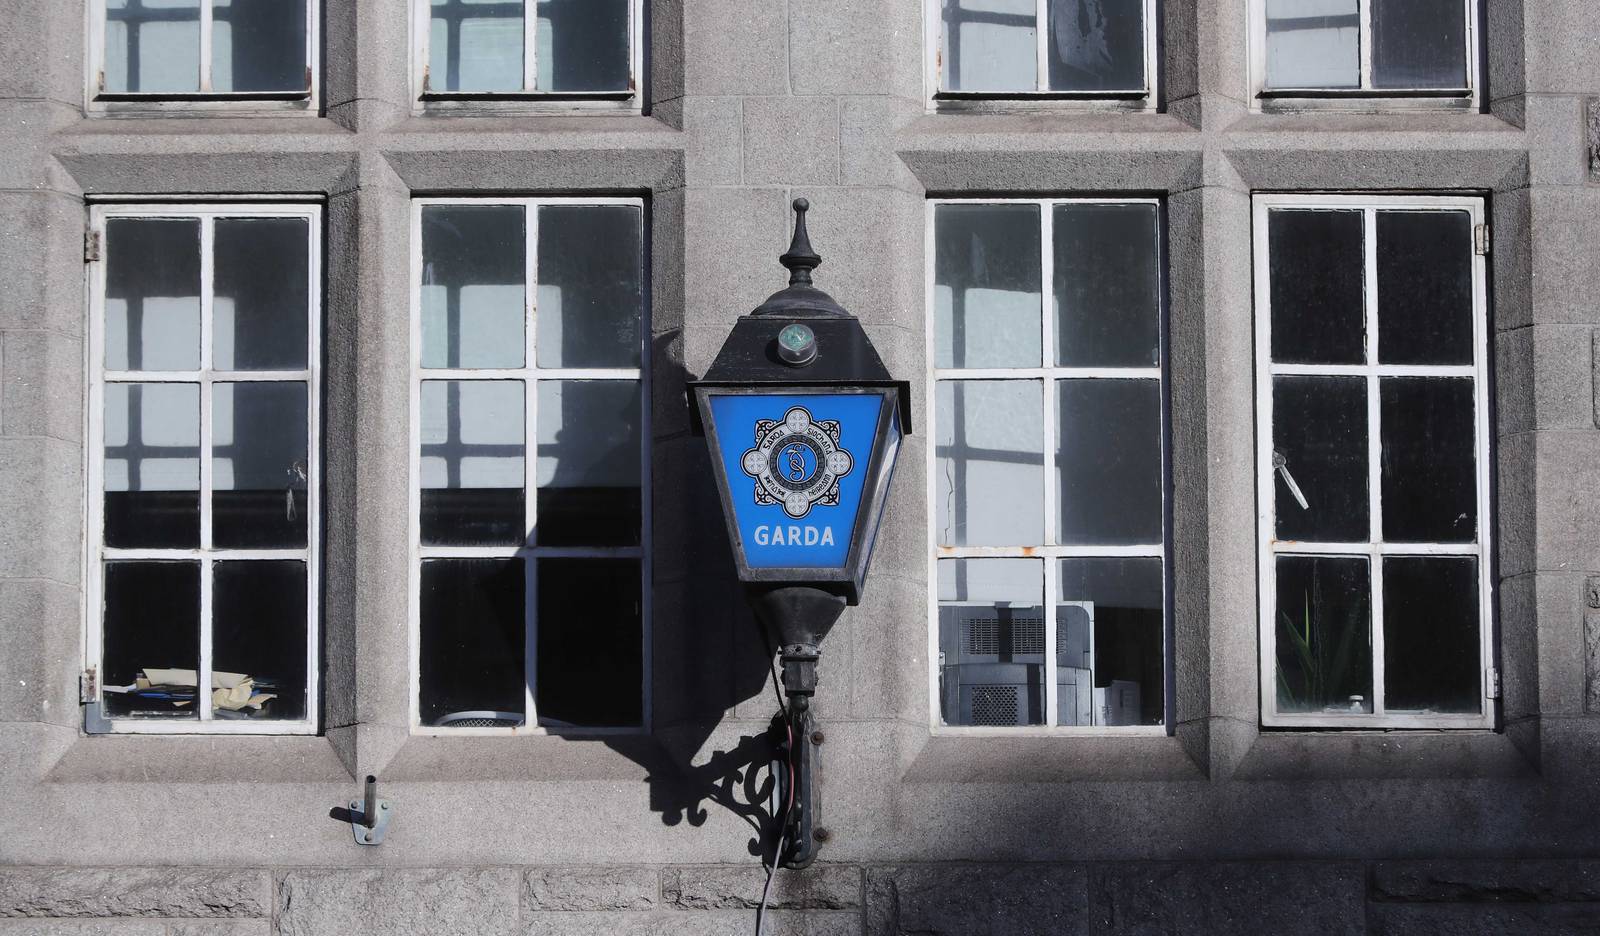 FILE GARDA STOCK

A stock picture of the Garda badge logo on Dublins Pearse Street Station. PRESS ASSOCIATION Photo. Picture date: Wednesday January 16, 2019. Photo credit should read: Niall Carson/PA Wire